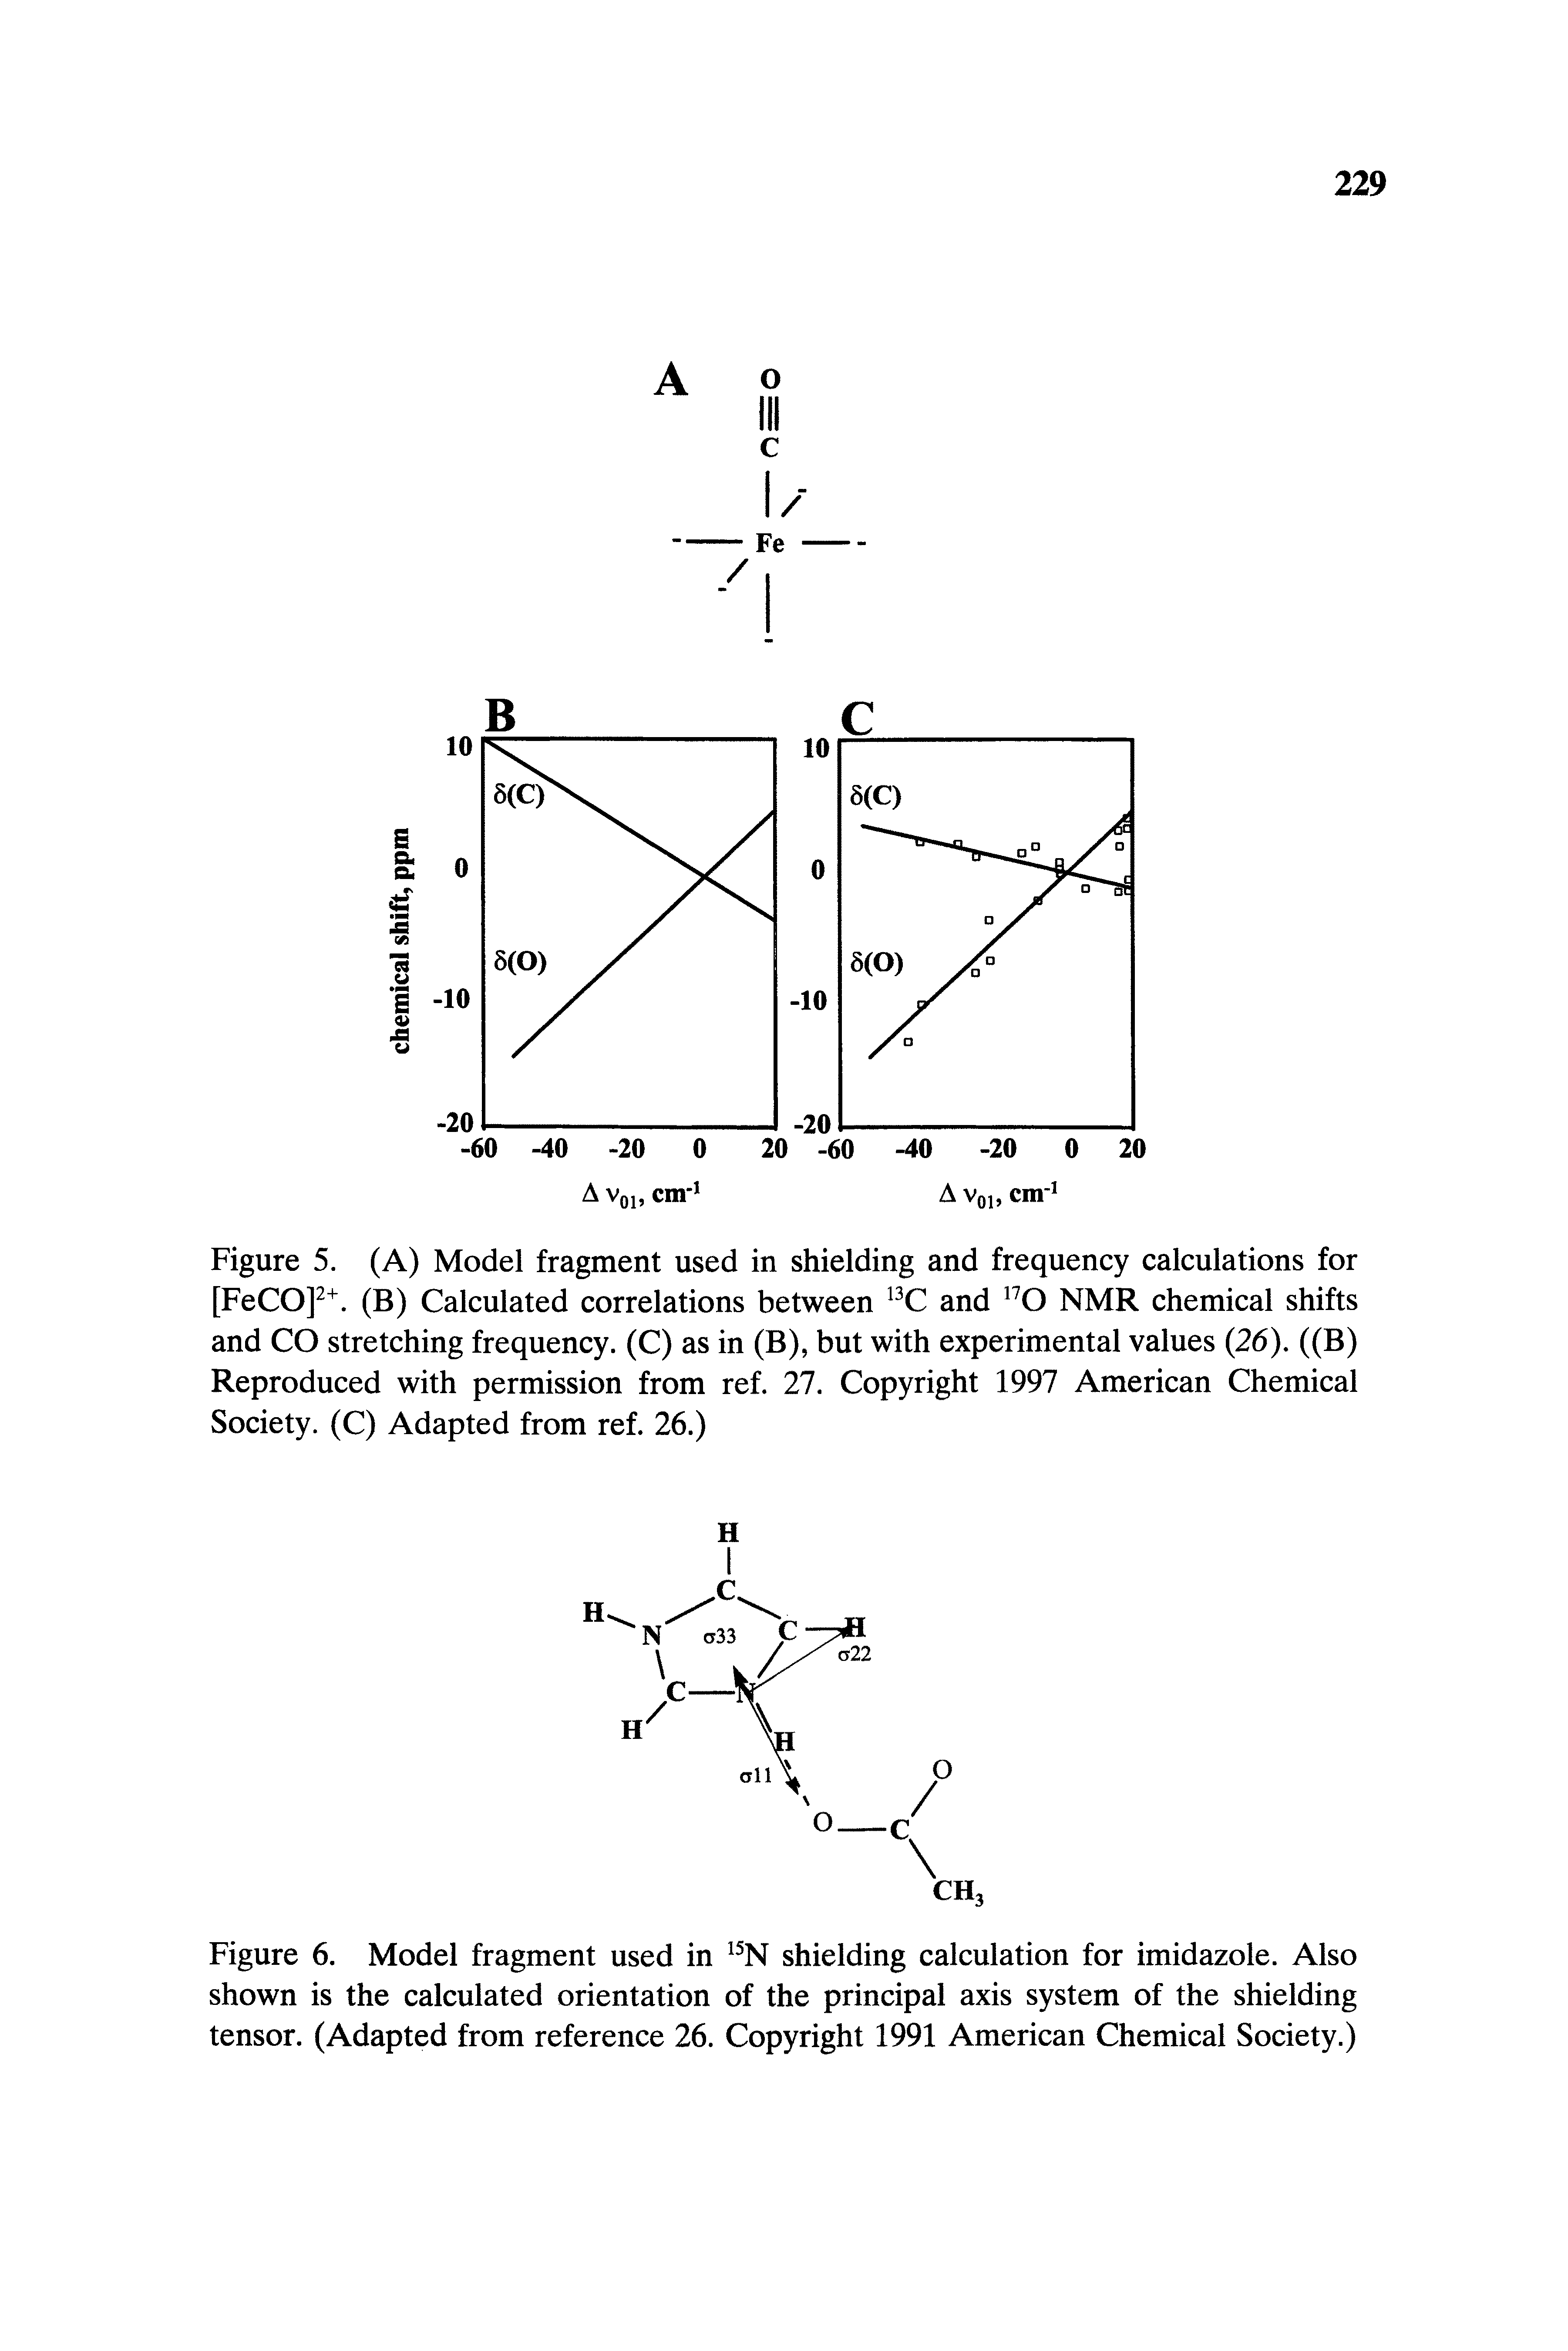 Figure 6. Model fragment used in 15N shielding calculation for imidazole. Also shown is the calculated orientation of the principal axis system of the shielding tensor. (Adapted from reference 26. Copyright 1991 American Chemical Society.)...